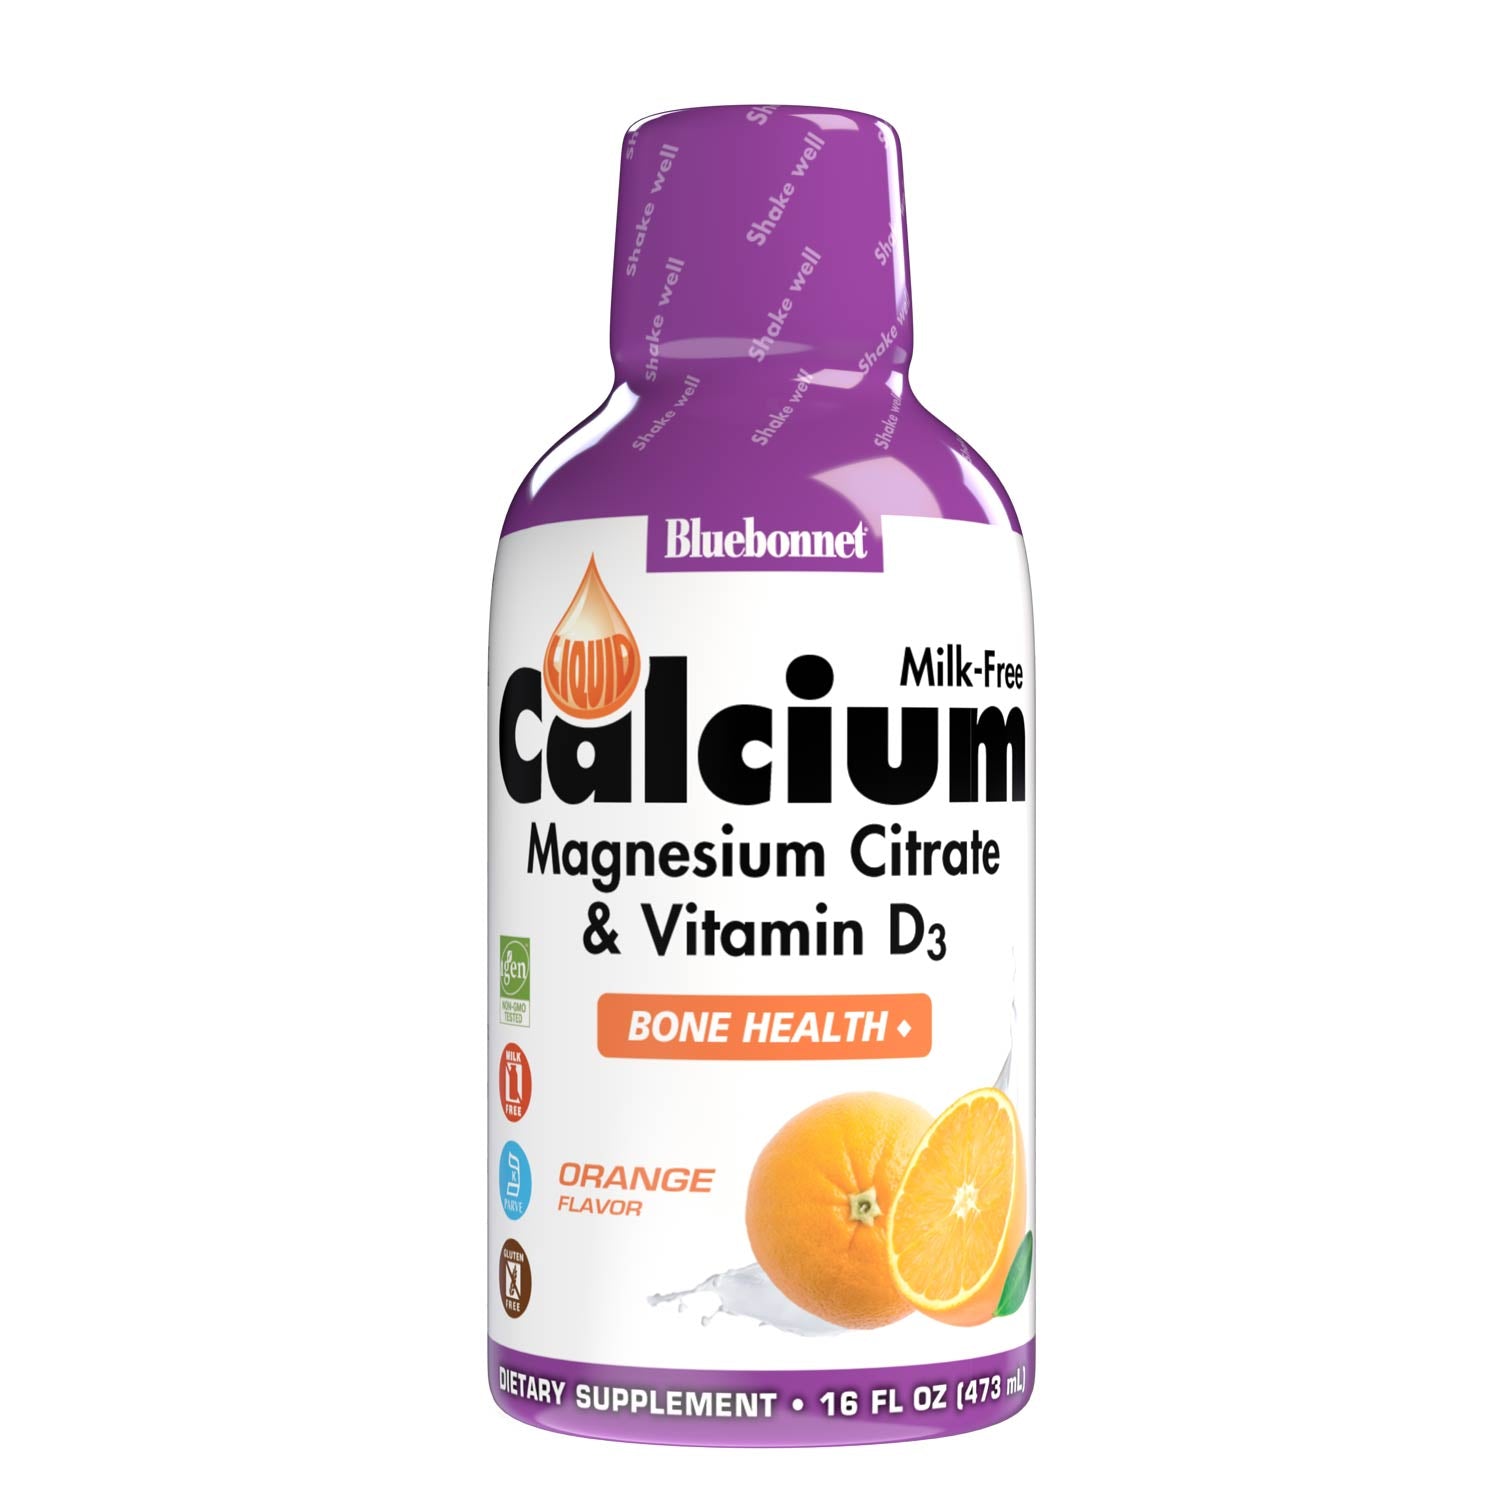 Bluebonnet's Liquid Calcium Magnesium Citrate with Vitamin D3 are formulated with calcium in a chelate of calcium citrate, as well as magnesium in a chelate of magnesium citrate and magnesium aspartate in a delicious orange flavor. Plus, this formula are formulated with vitamin D3 (cholecalciferol) from lanolin for strong healthy bones. #size_16 fl oz